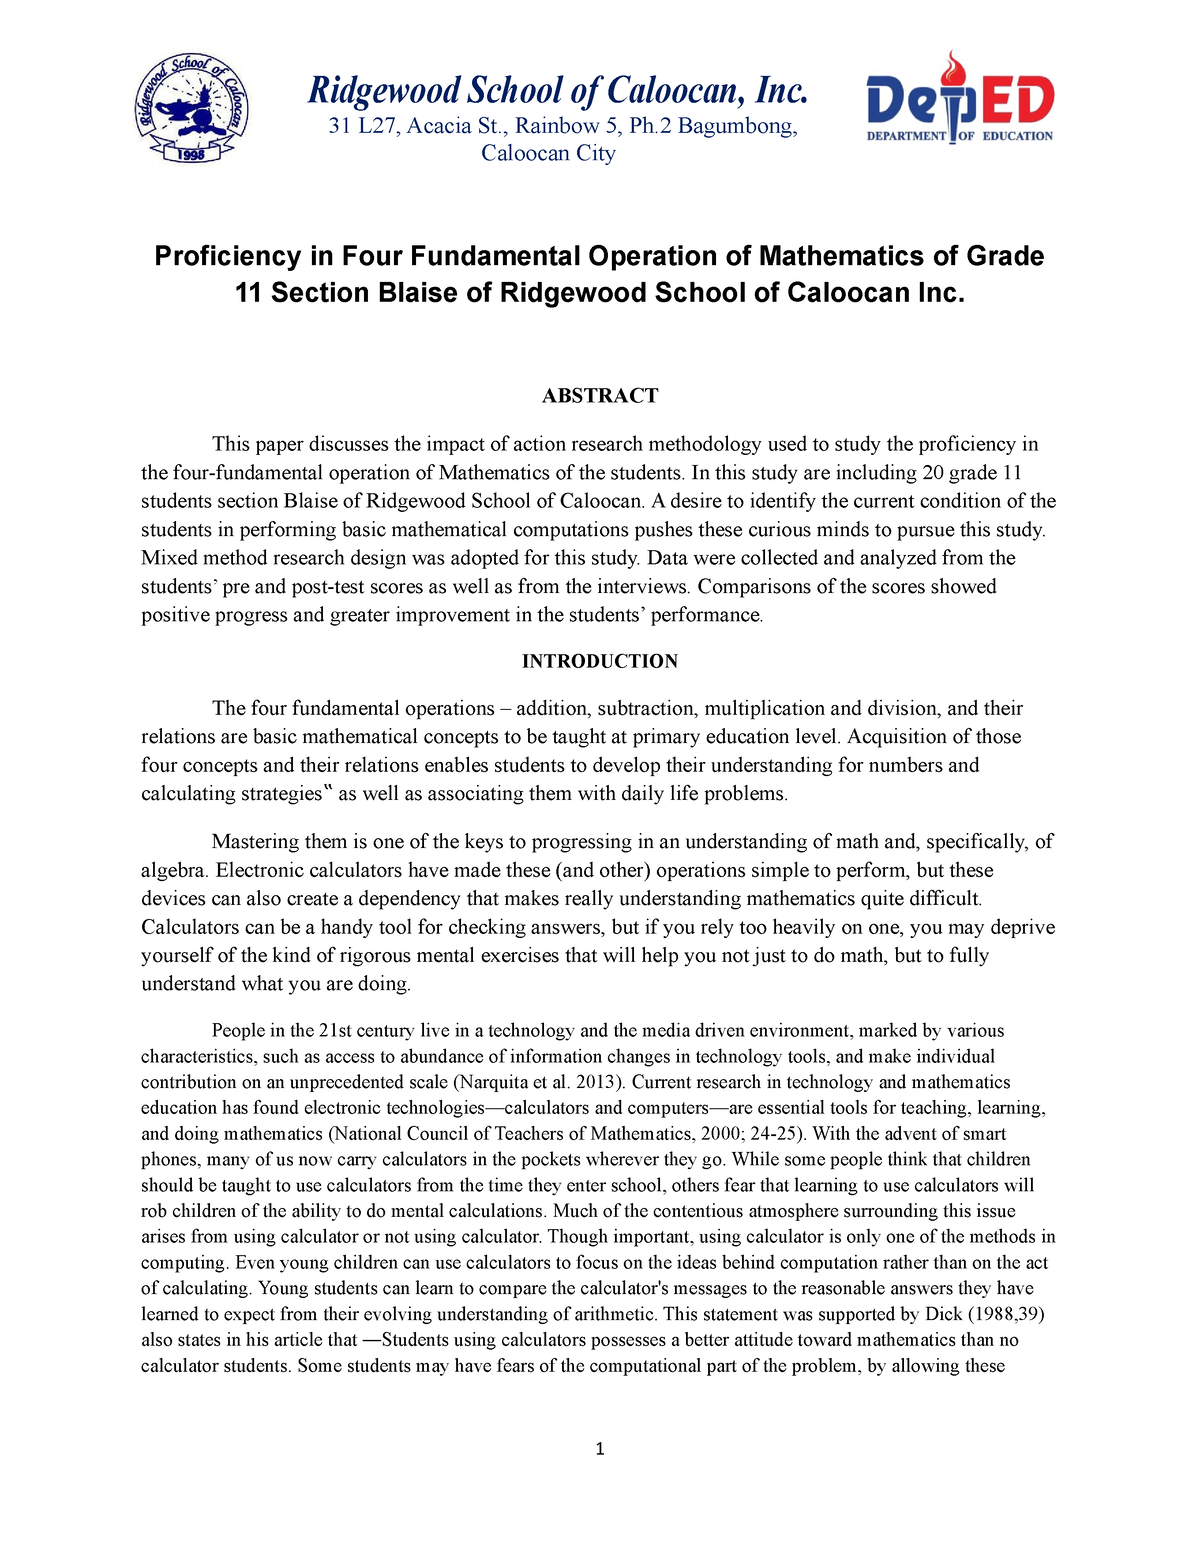 thesis about four fundamental operations